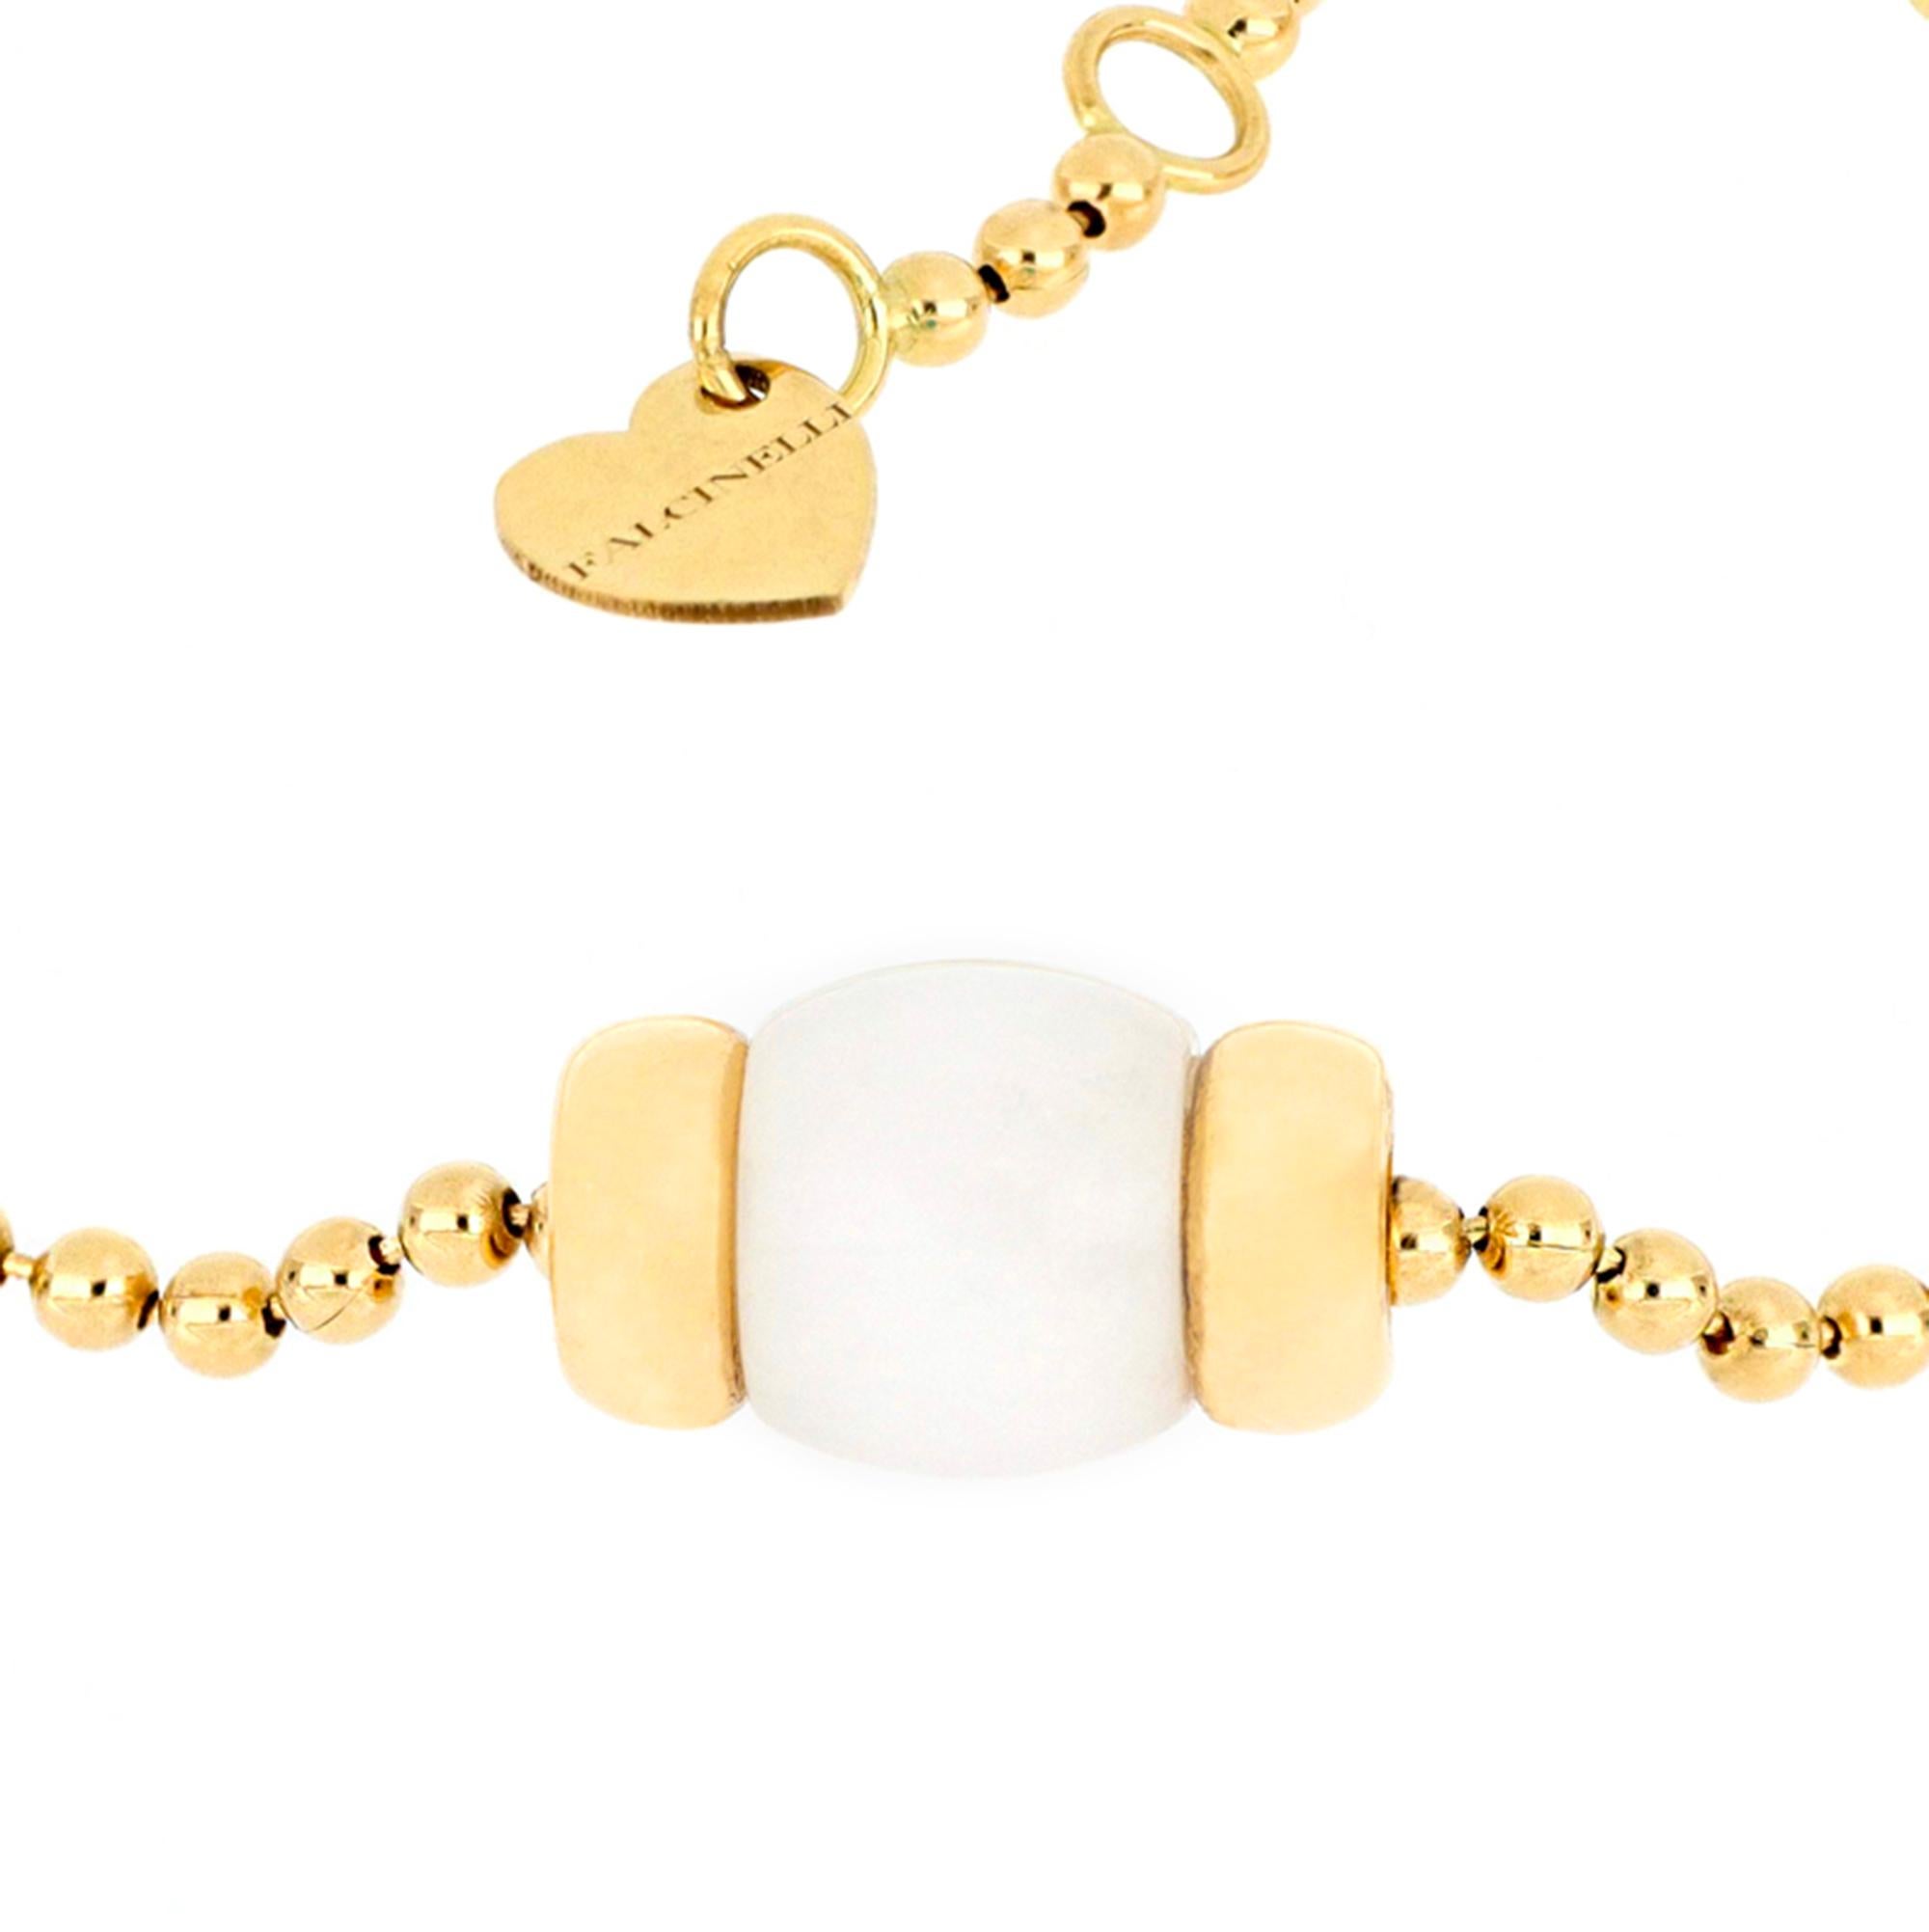 The yellow gold ball chain, light and comfortable on the skin, reveals all the craftsmanship with which this bracelet from Le Carrousel collection was designed. The central barrel-shaped pendant, surrounded on both sides by polished 18-karat gold,